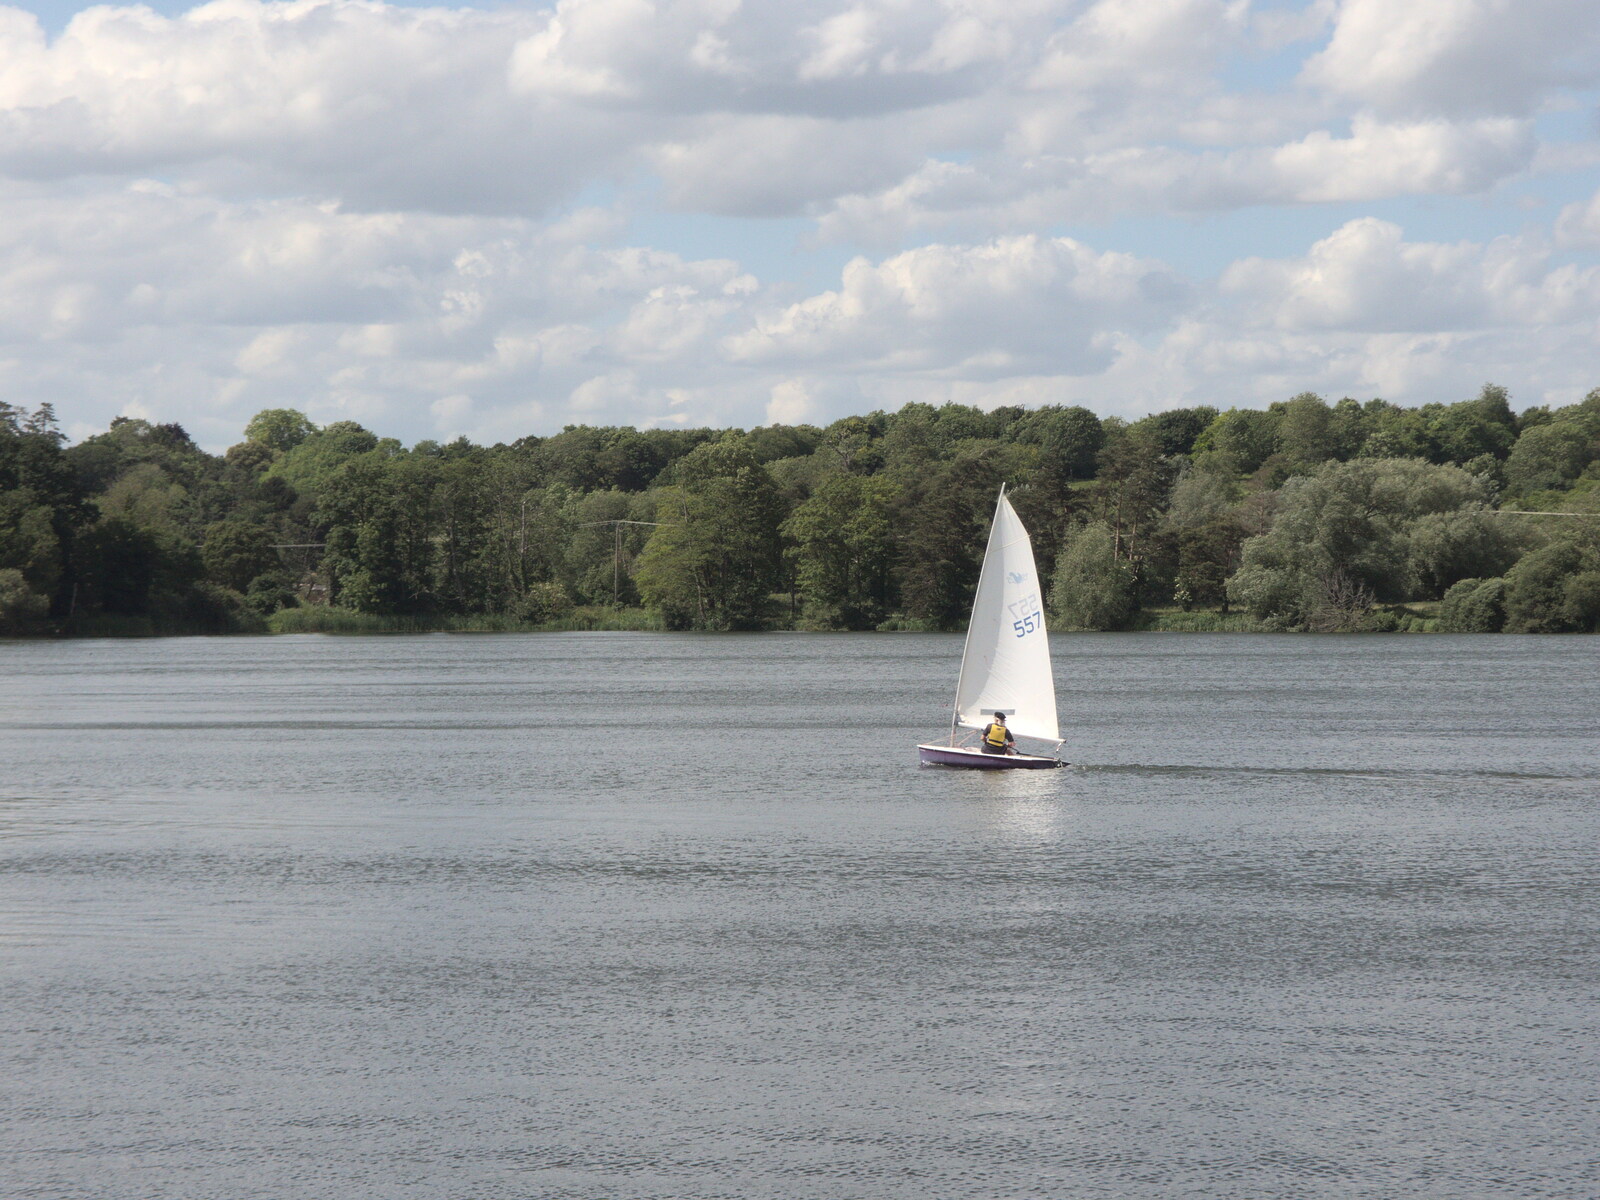 A Day at the Lake, Weybread Pits, Harleston, Norfolk - 11th June 2022: A dinghie canes about